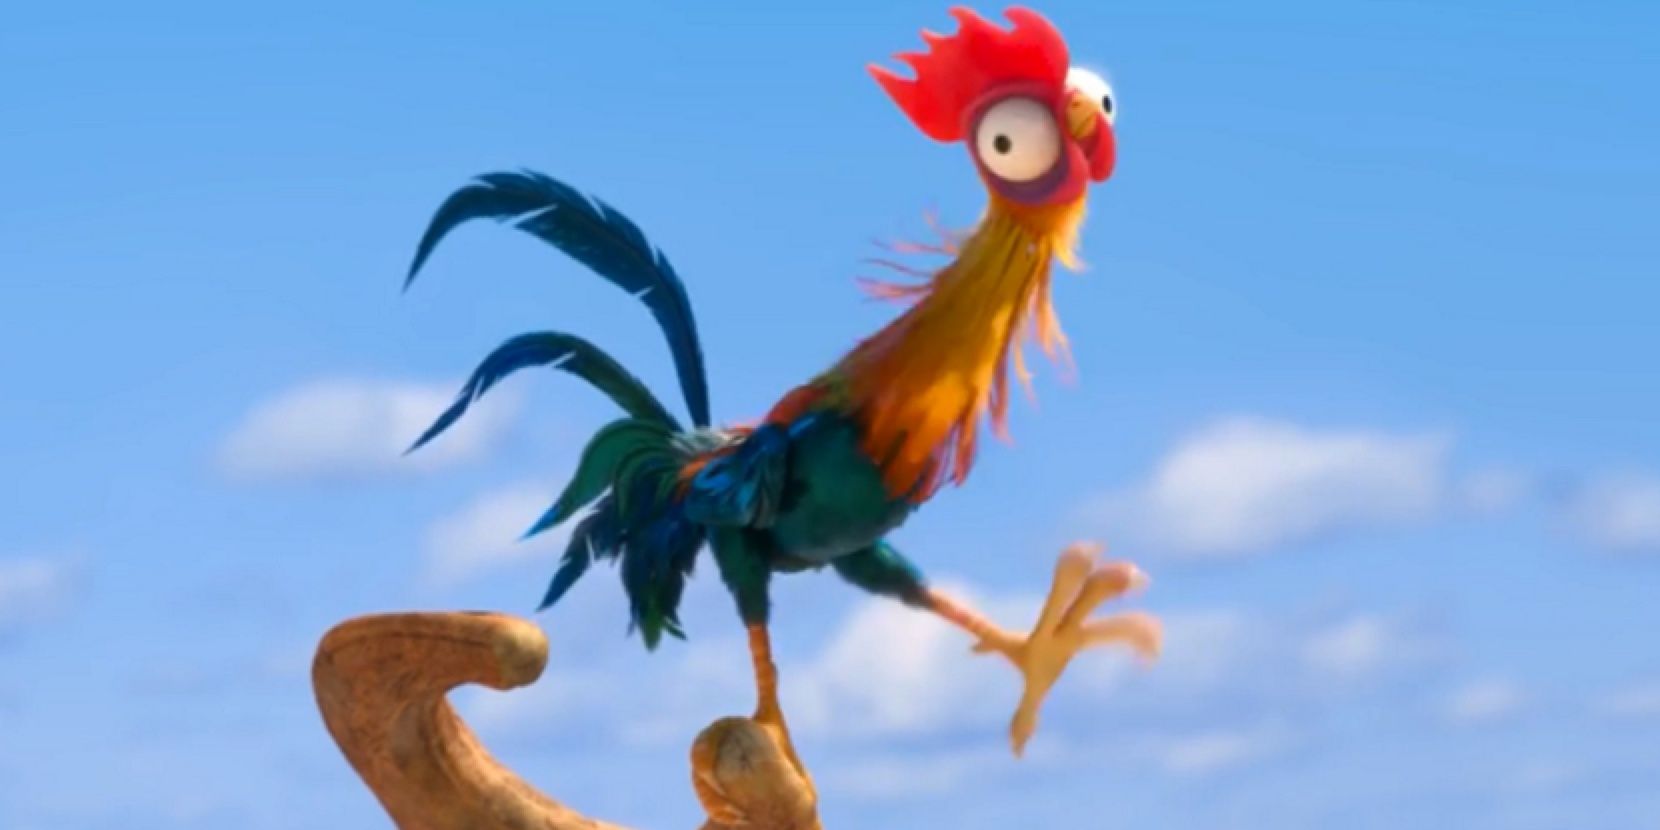 Hei Hei walks off a perch, unaware of his impending fall in Moana